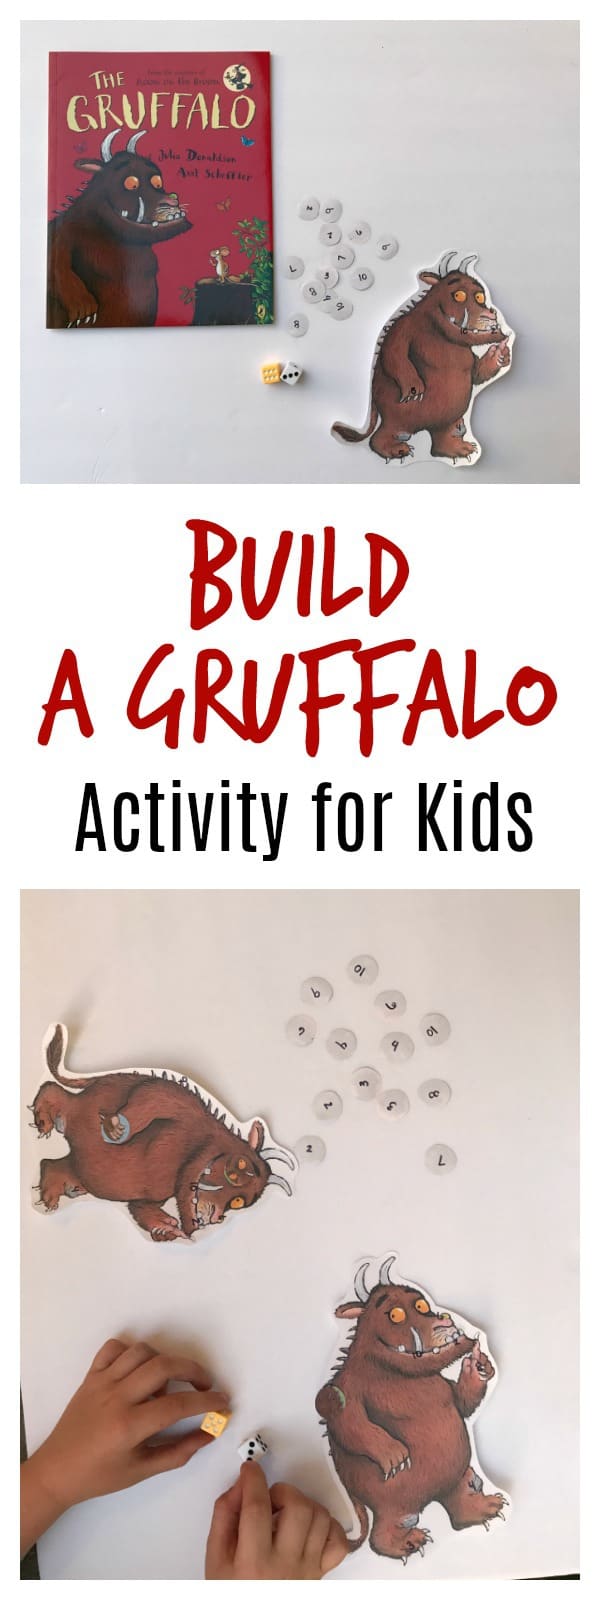 Inspired by the book The Gruffalo by Julia Donaldson play this 1 - 4 player counting and number recognition game as you build a Gruffalo. Perfect for preschoolers working on these number skills that love this fun children's picture book.